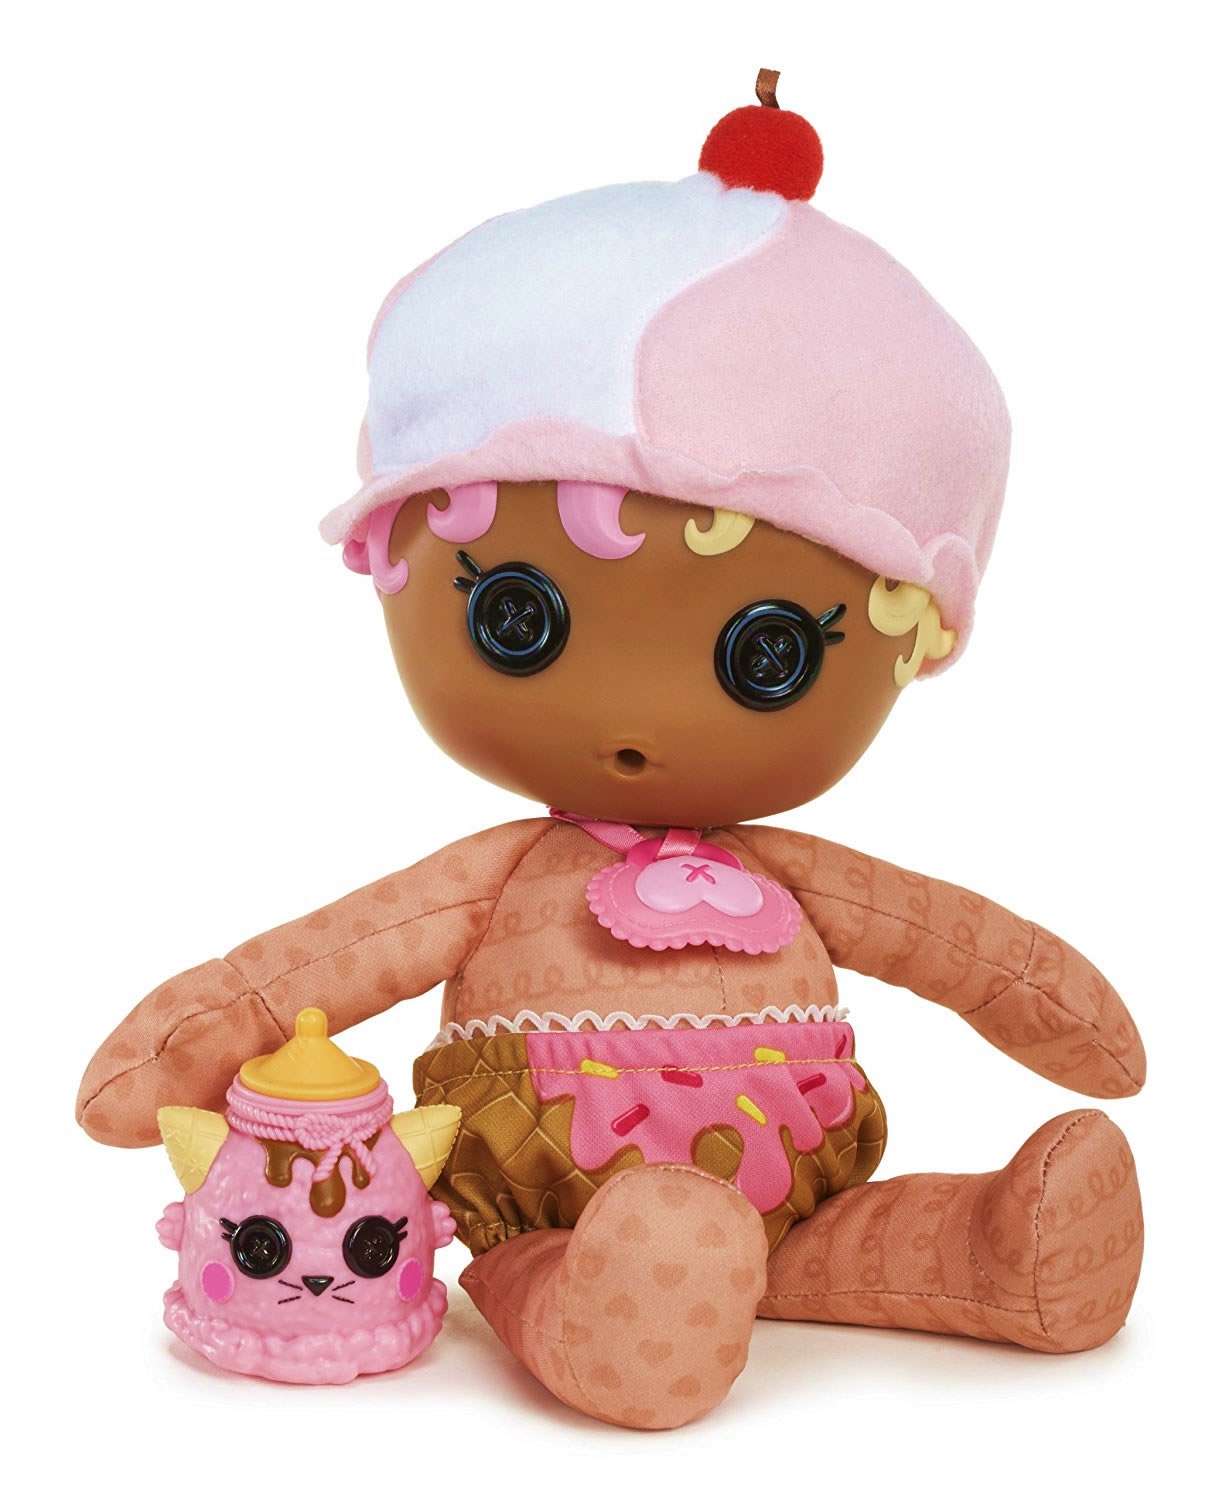 Lalaloopsy Babbies 'Scoops Waffle Cone' Plush Doll Toy